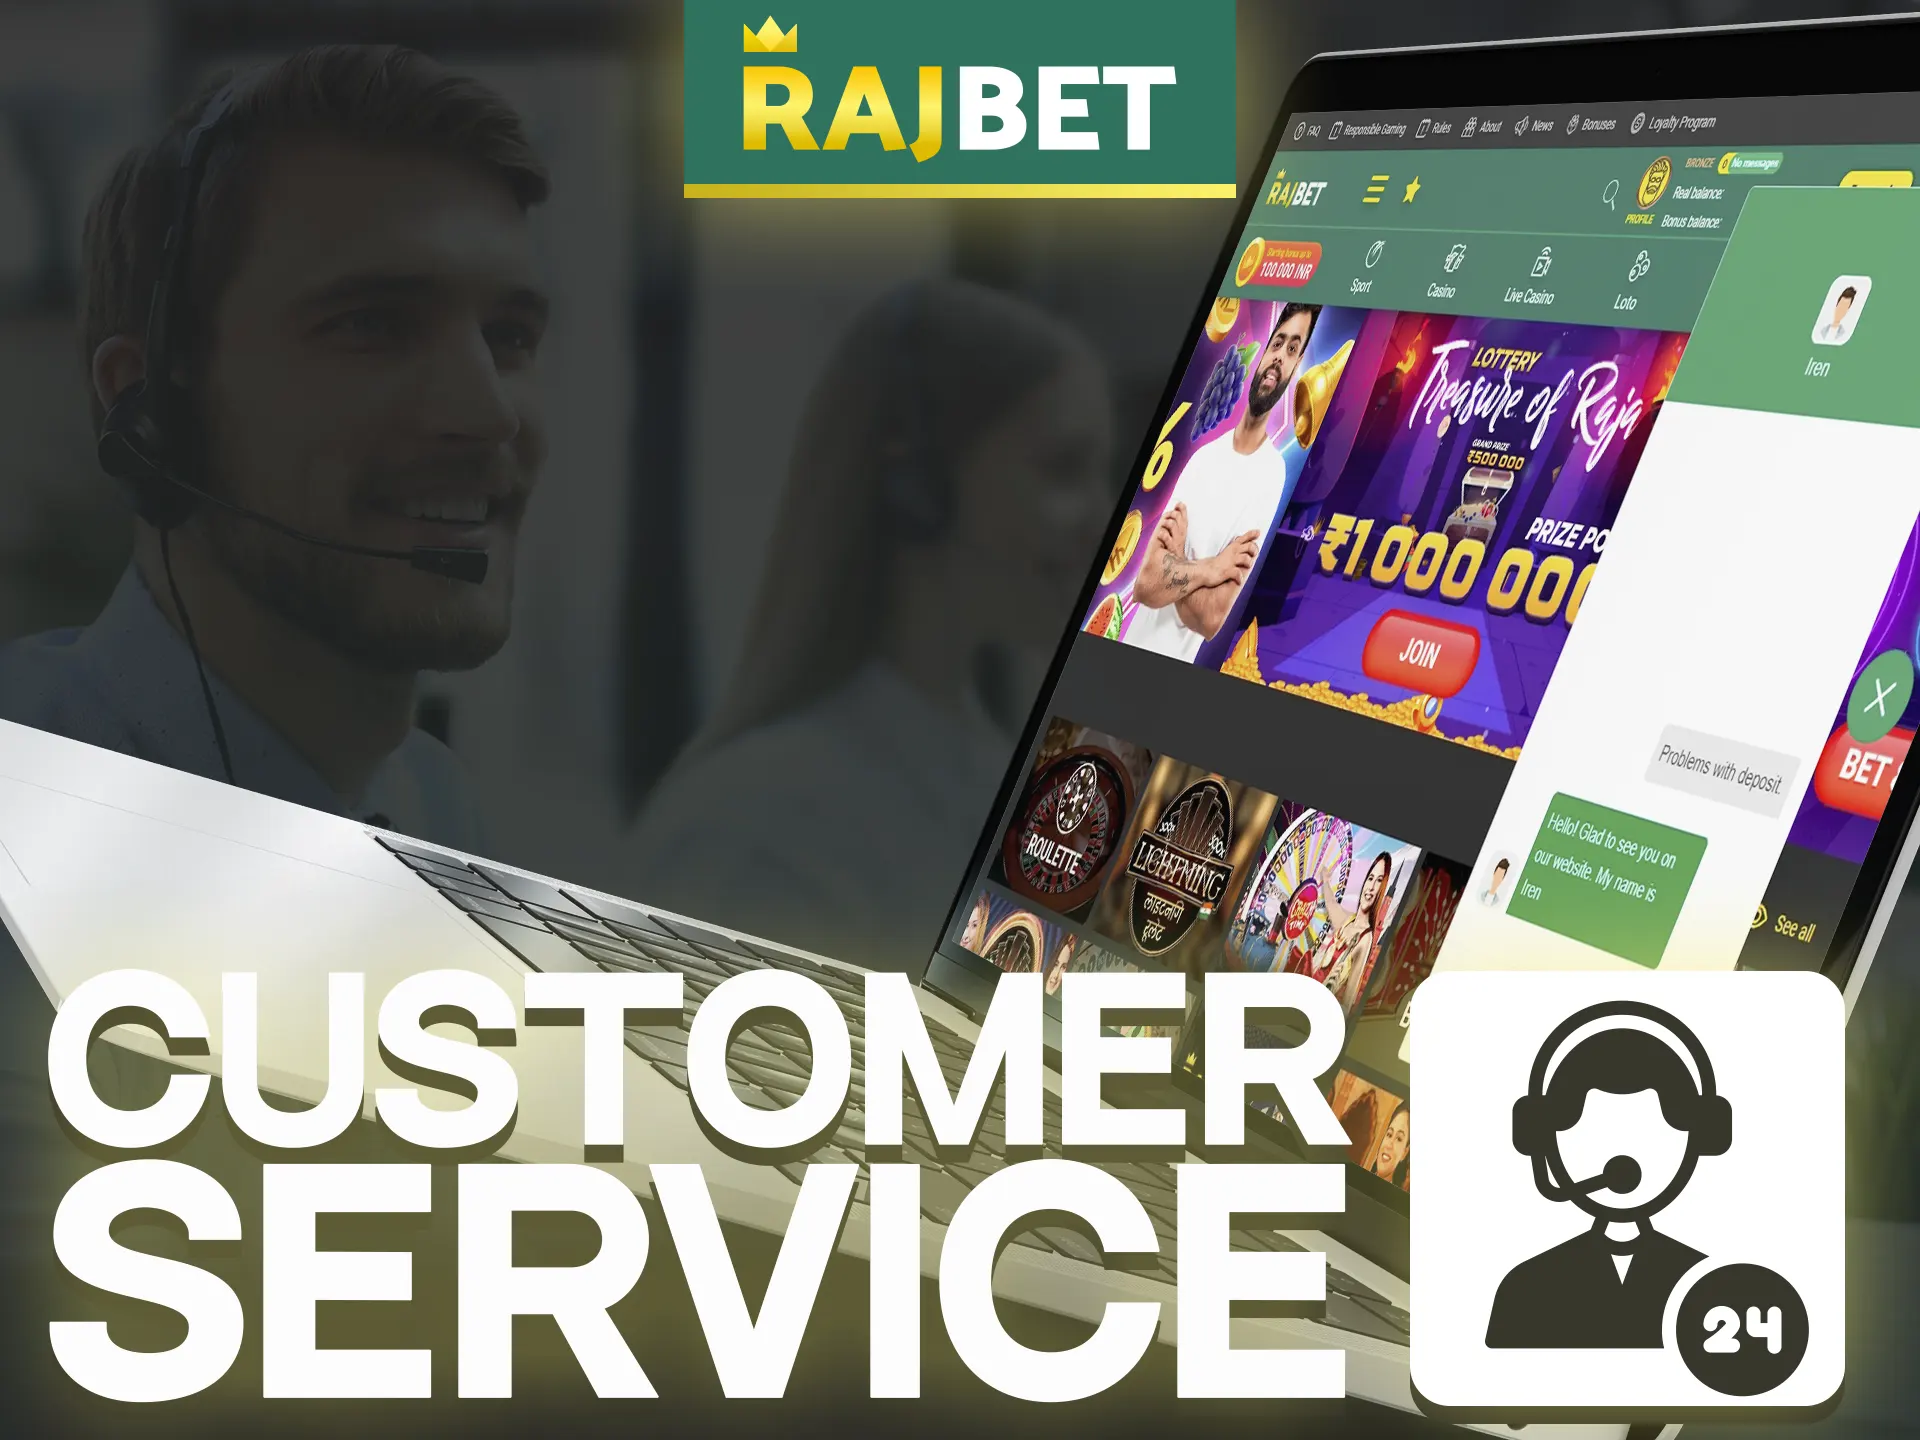 You can always contact Rajbet's customer support team.